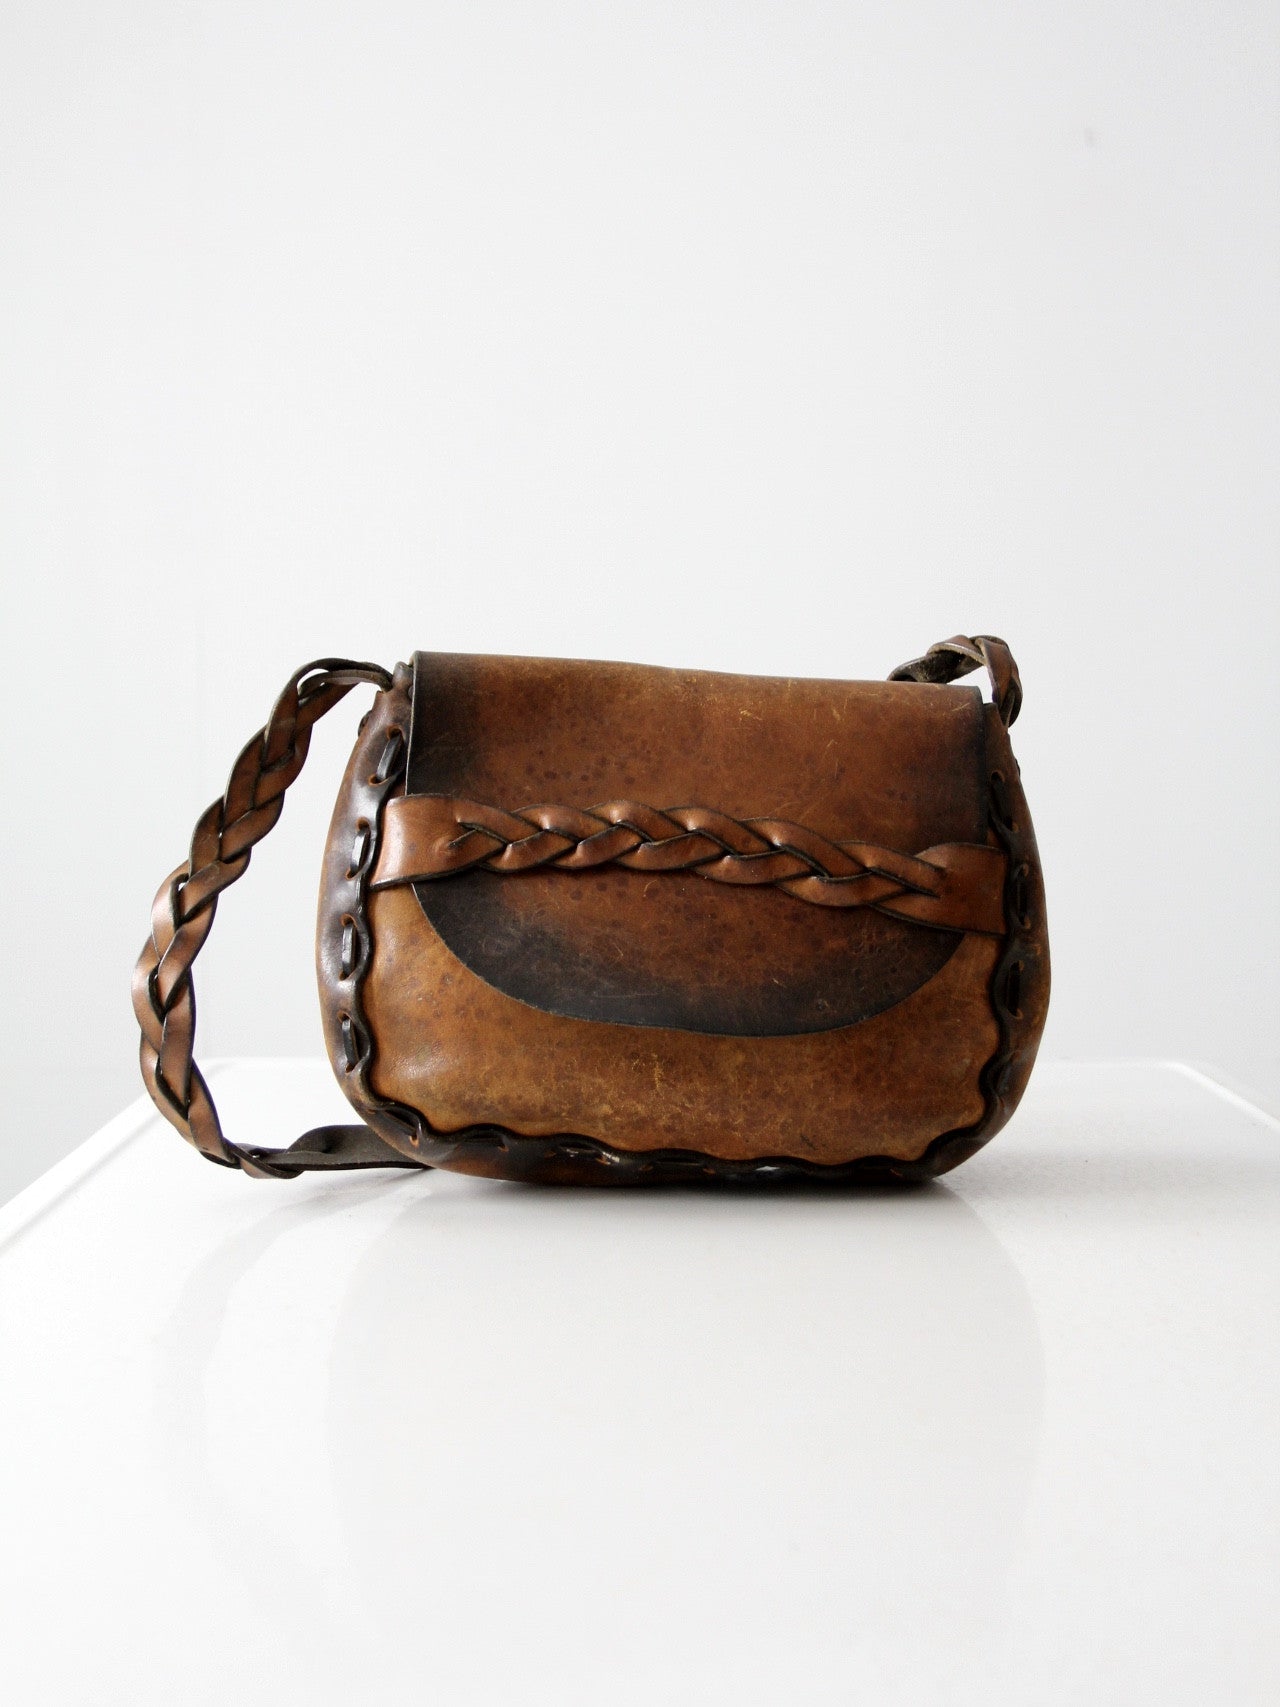 vintage 60s hand-crafted leather bag